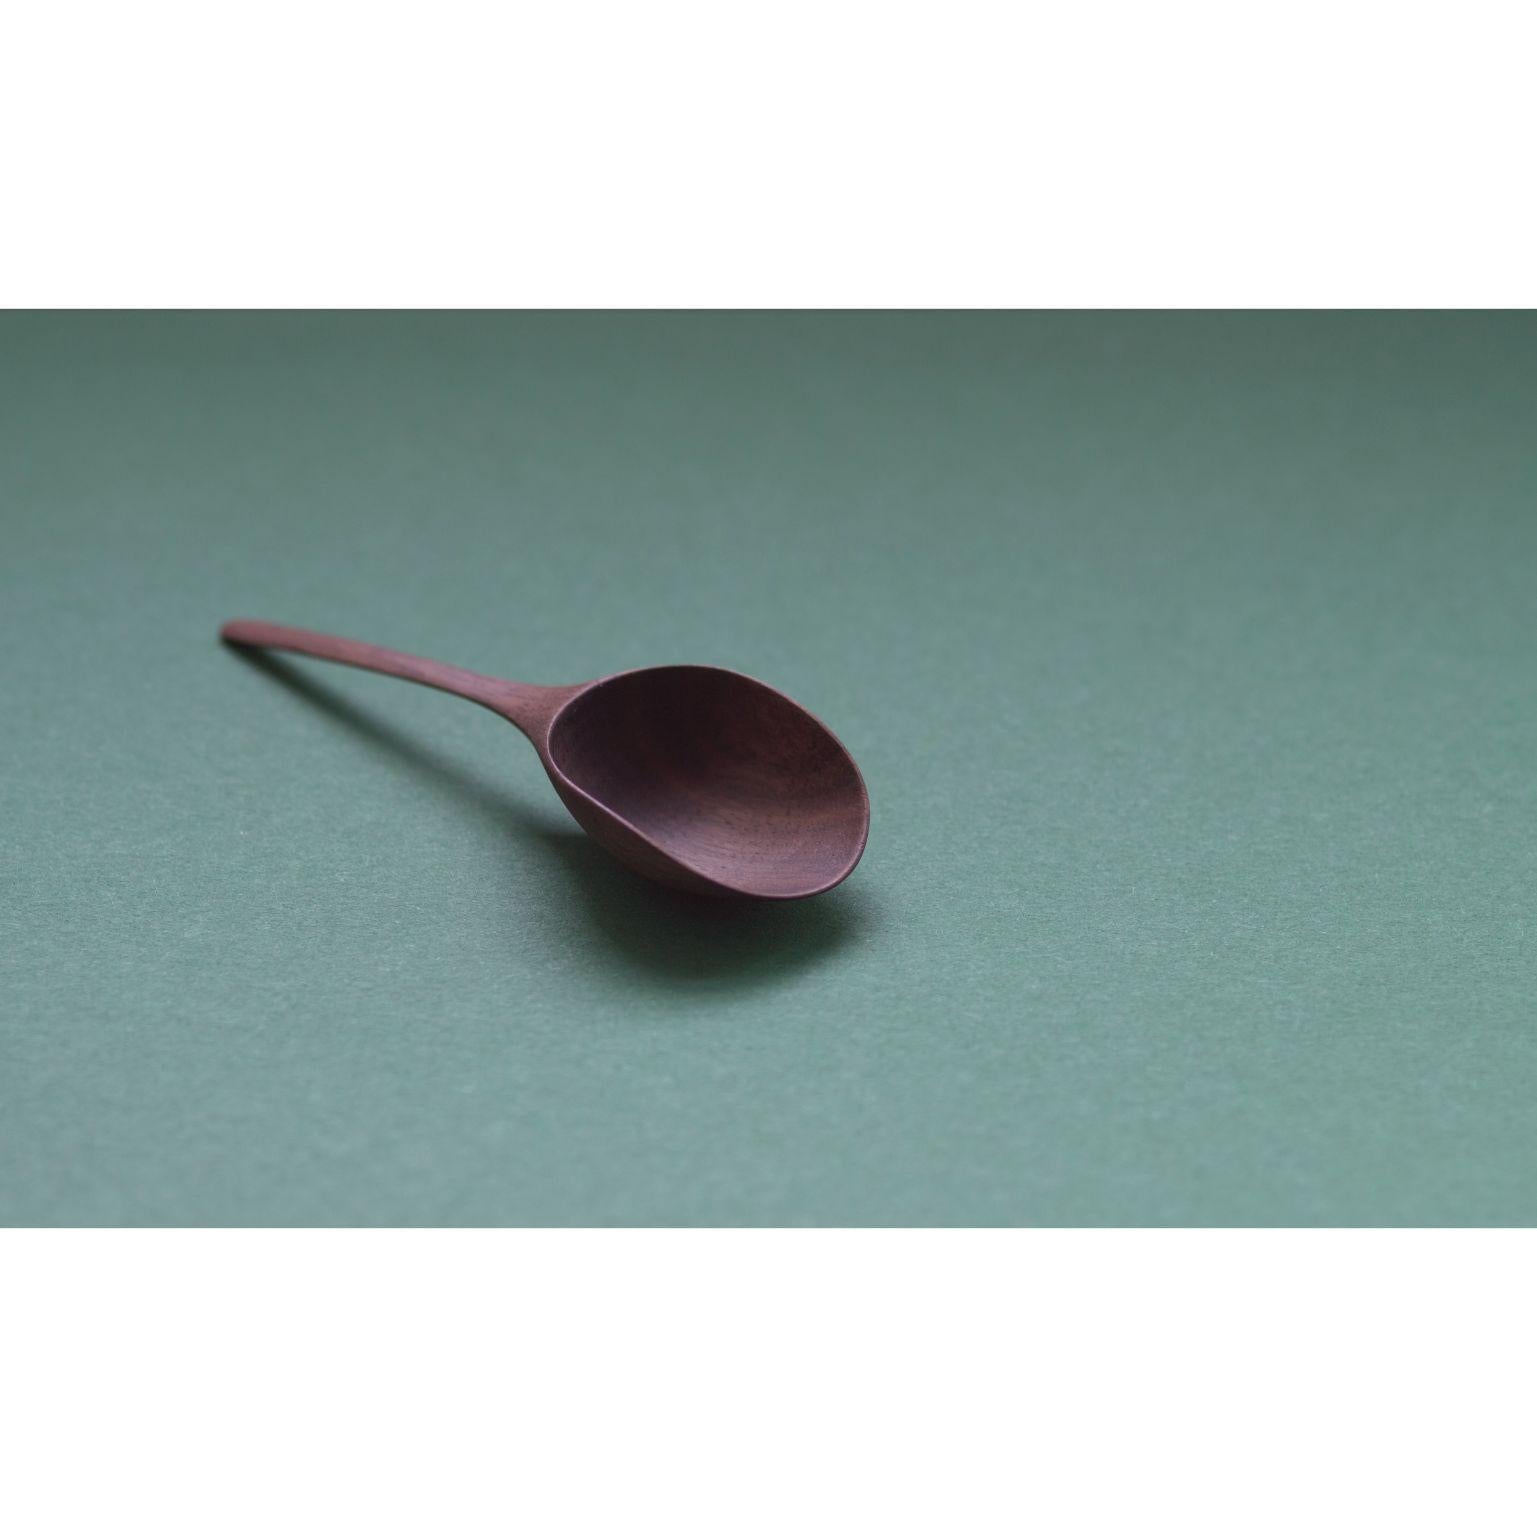 Kupu spoon by Antrei Hartikainen
Materials: Walnut, maple, natural oil wax
Dimensions: W 10 cm

Also available in a variety of woods

The unusual proportions of the kupu spoons give them an unexpected, delicate charm. Perfect for serving